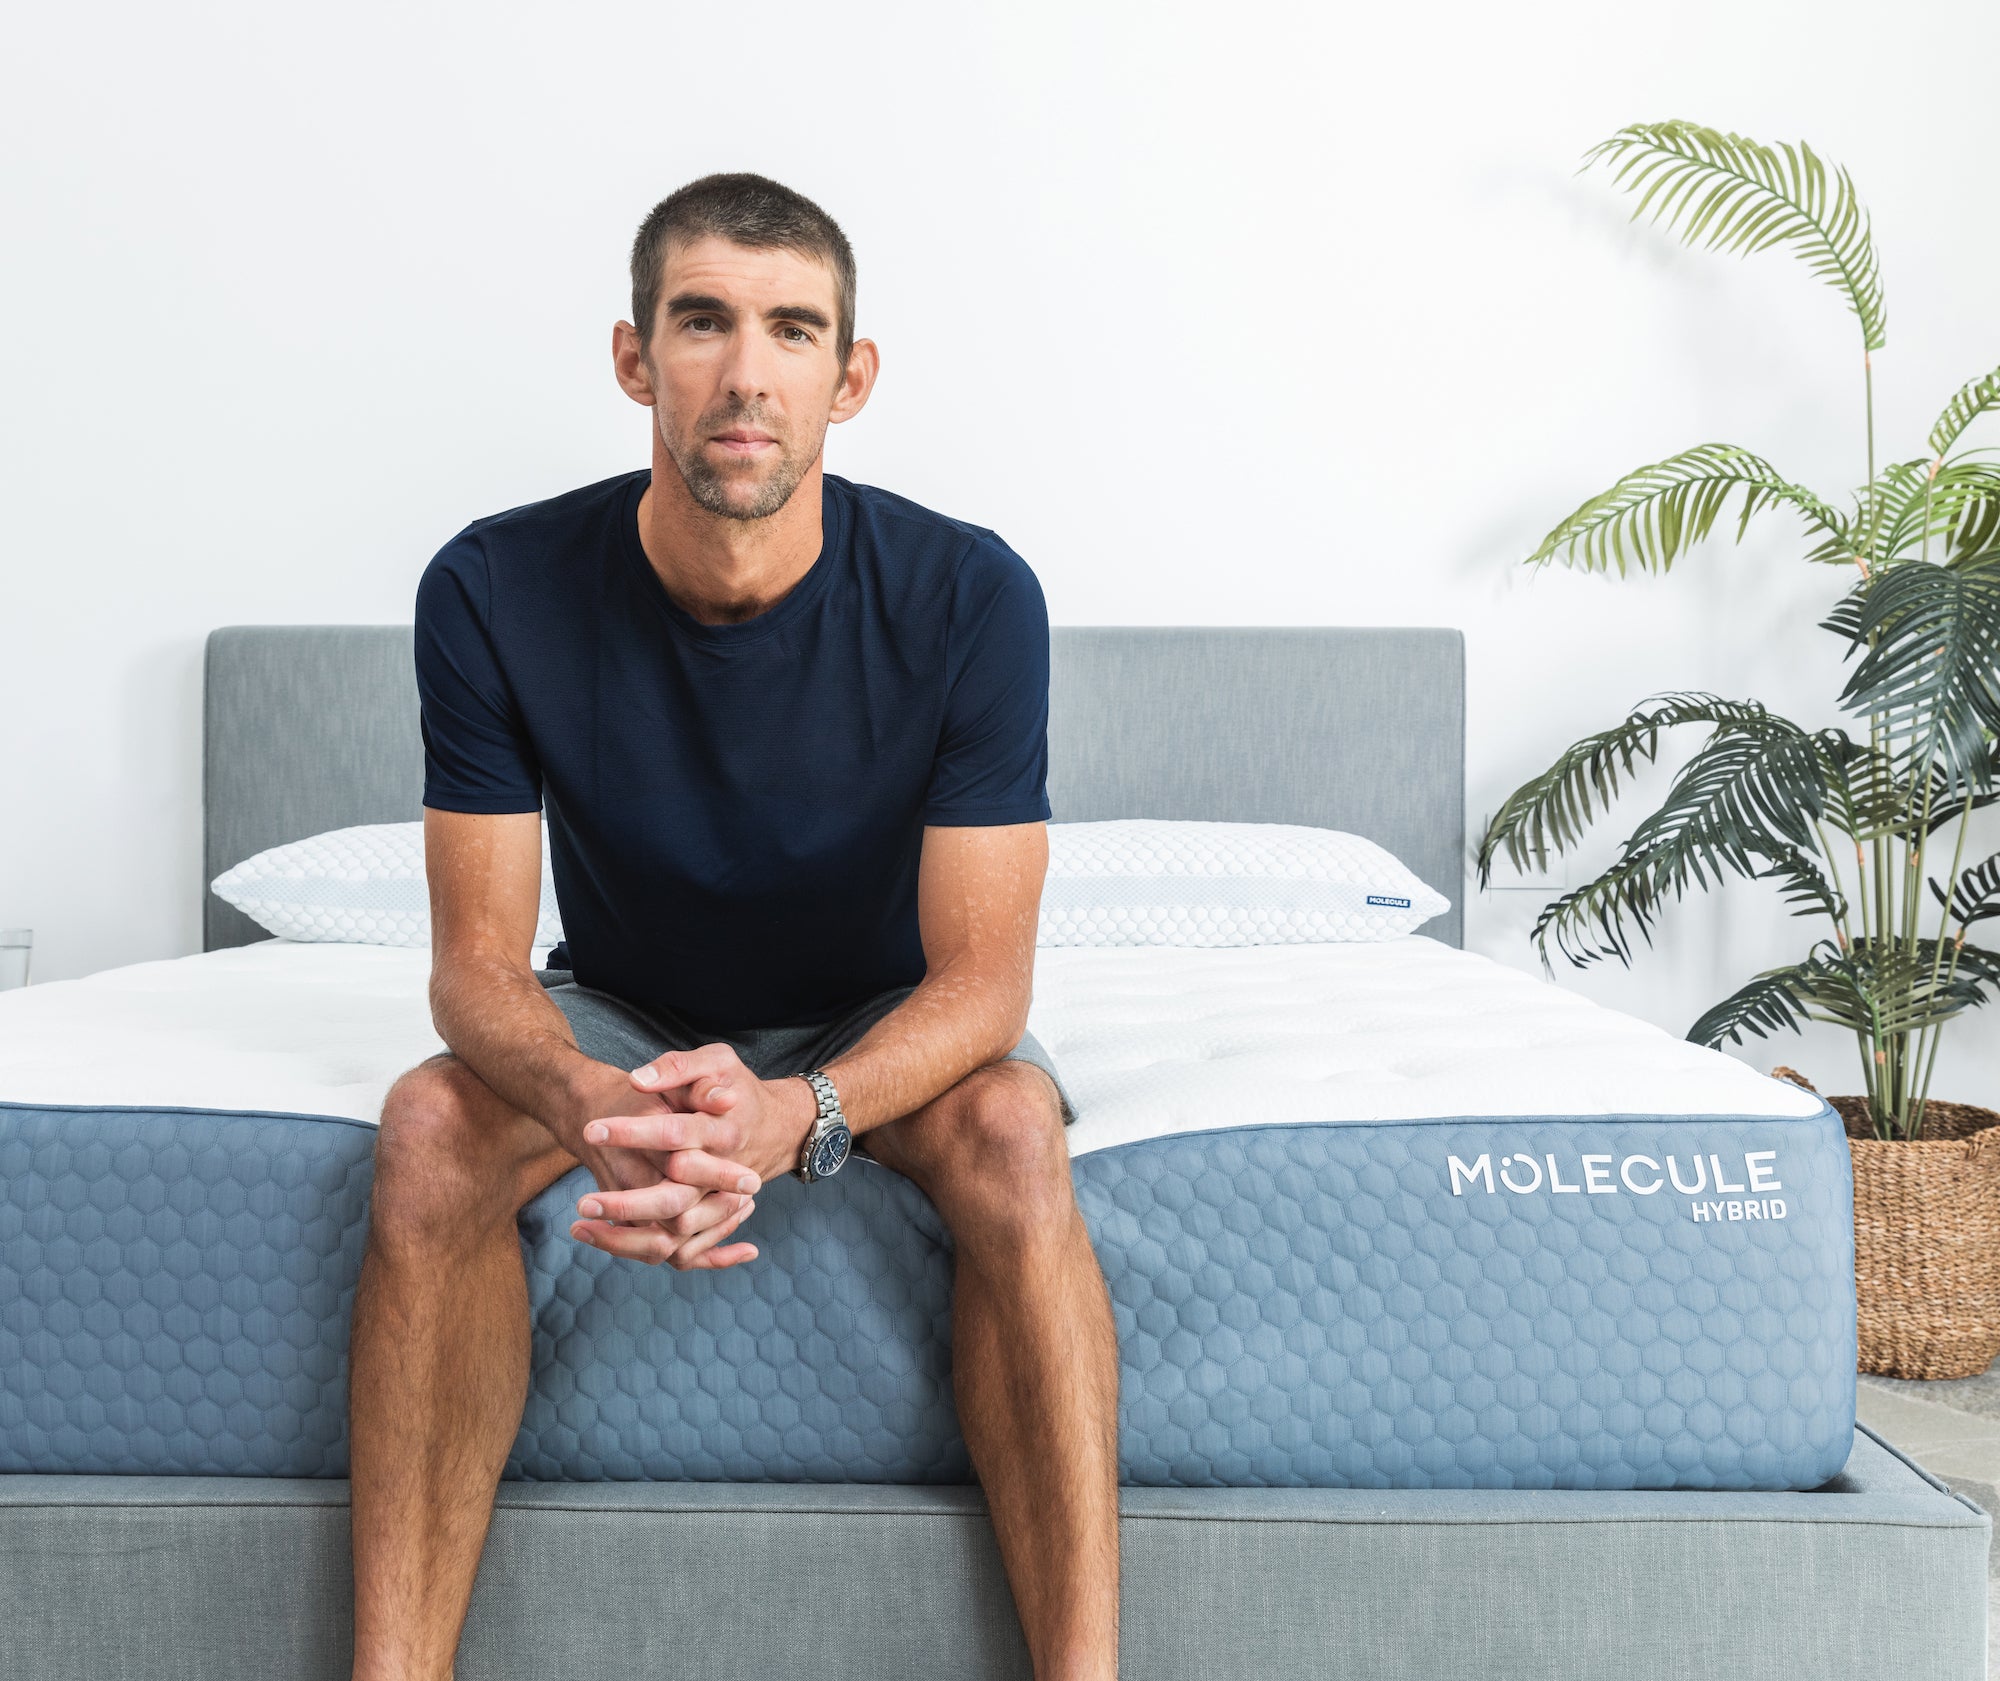 Michael Phelps sitting on a Molecule mattress with his hands clasped